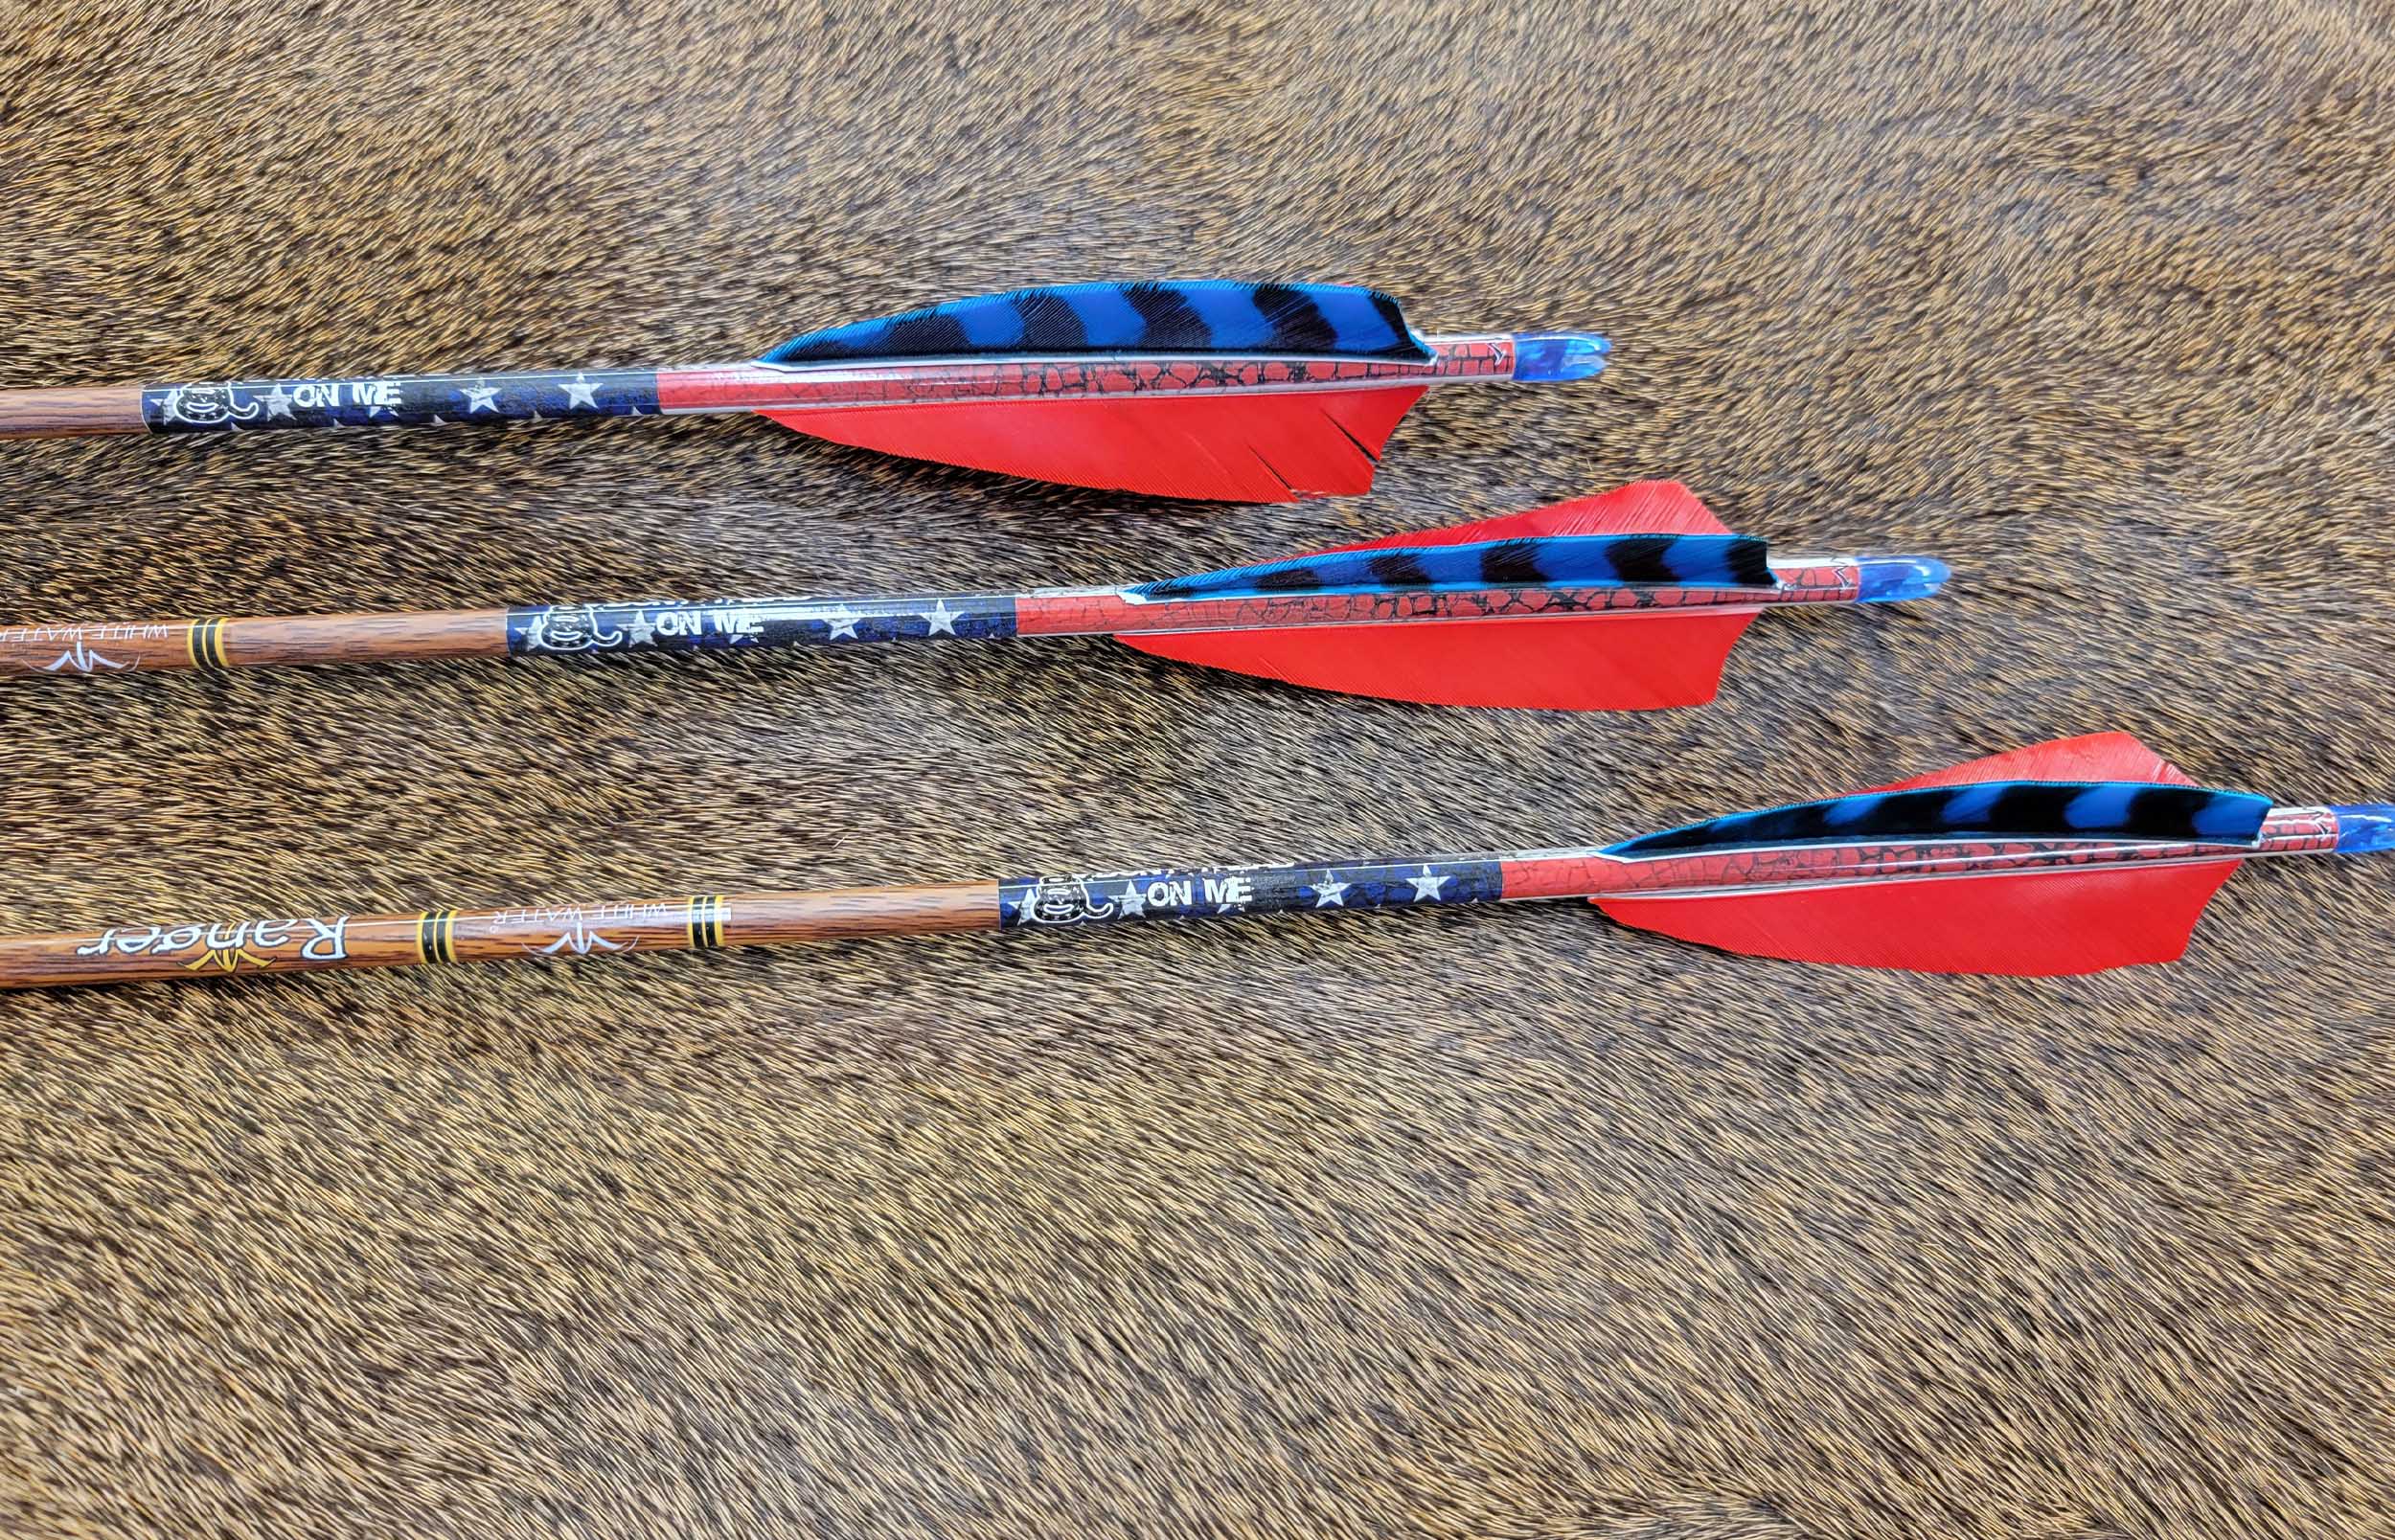 Anyone have experience with the MAC Dawn 5/16 wooden arrows from